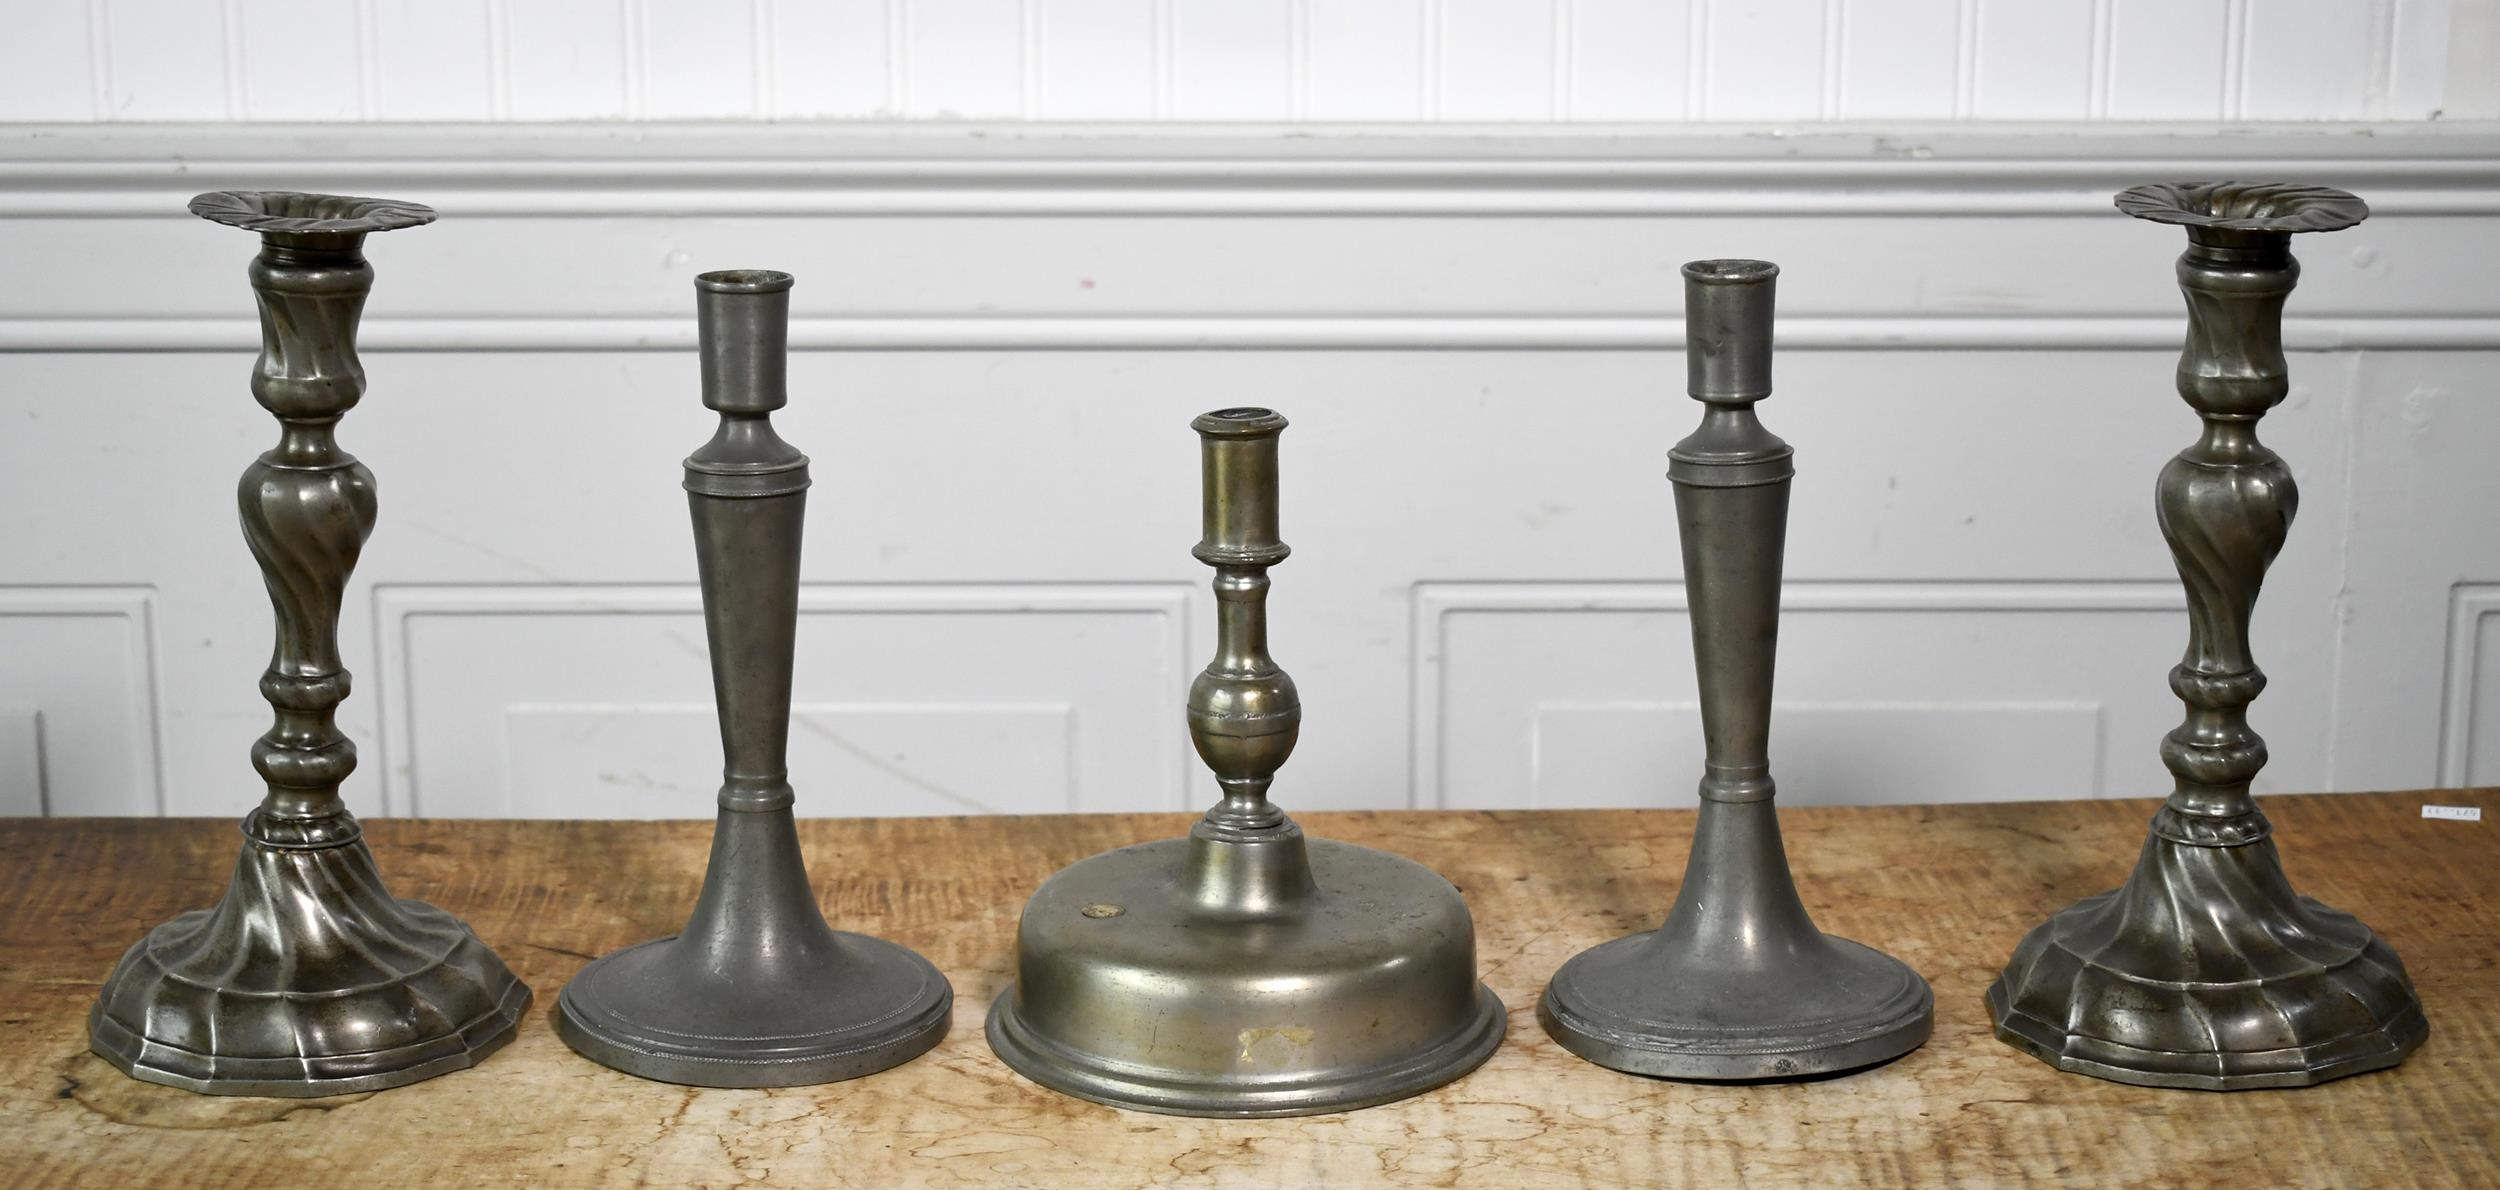 EARLY PEWTER CANDLESTICKS. 17th